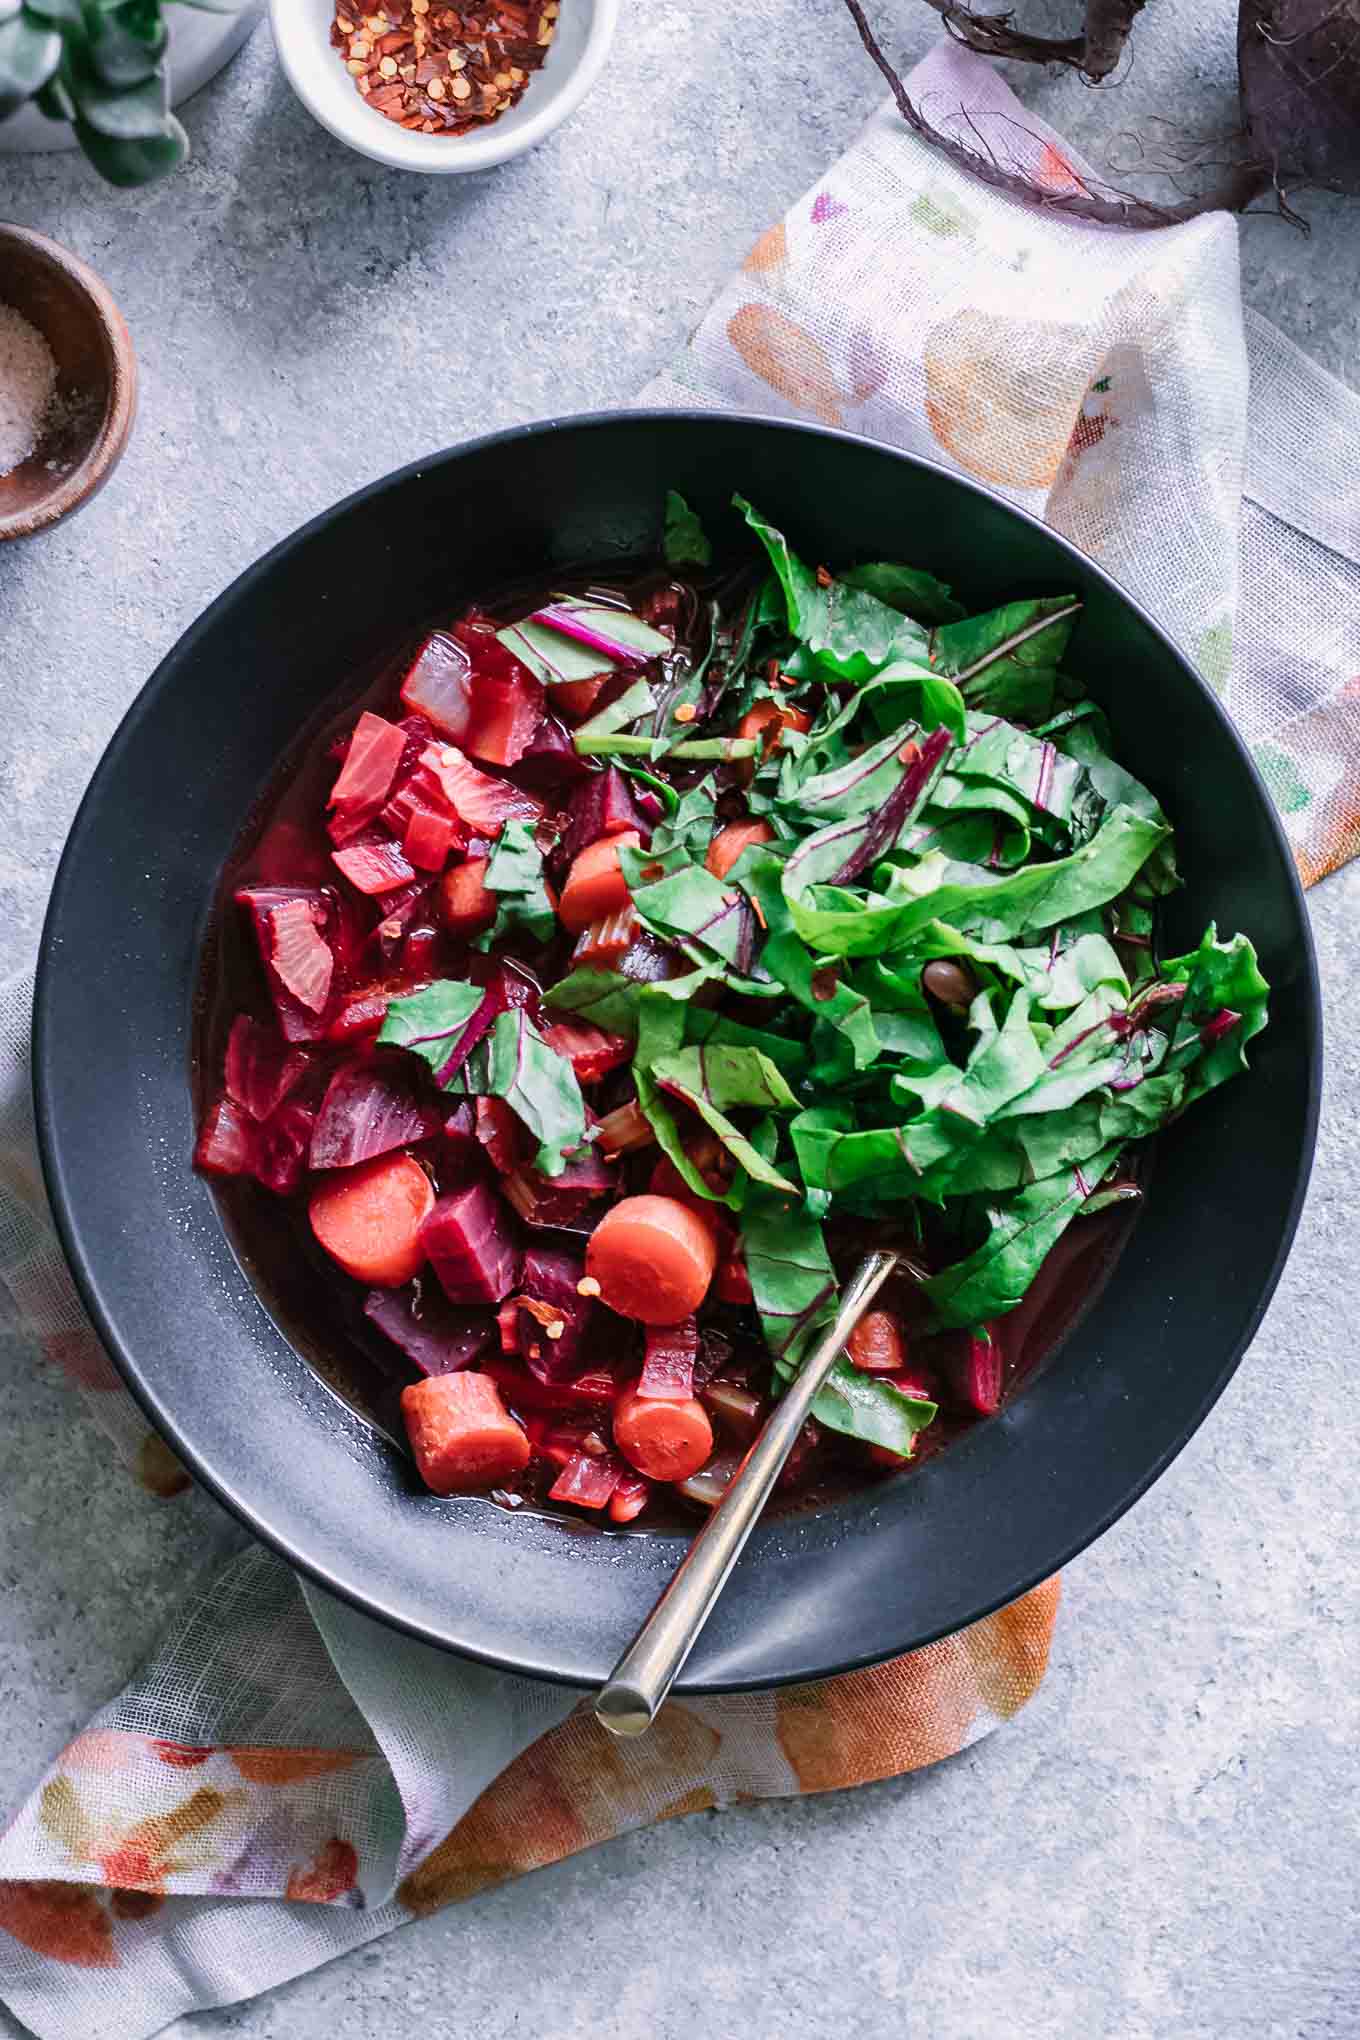 beet vegetable soup with chopped beet greens in a black bowl on a blue table